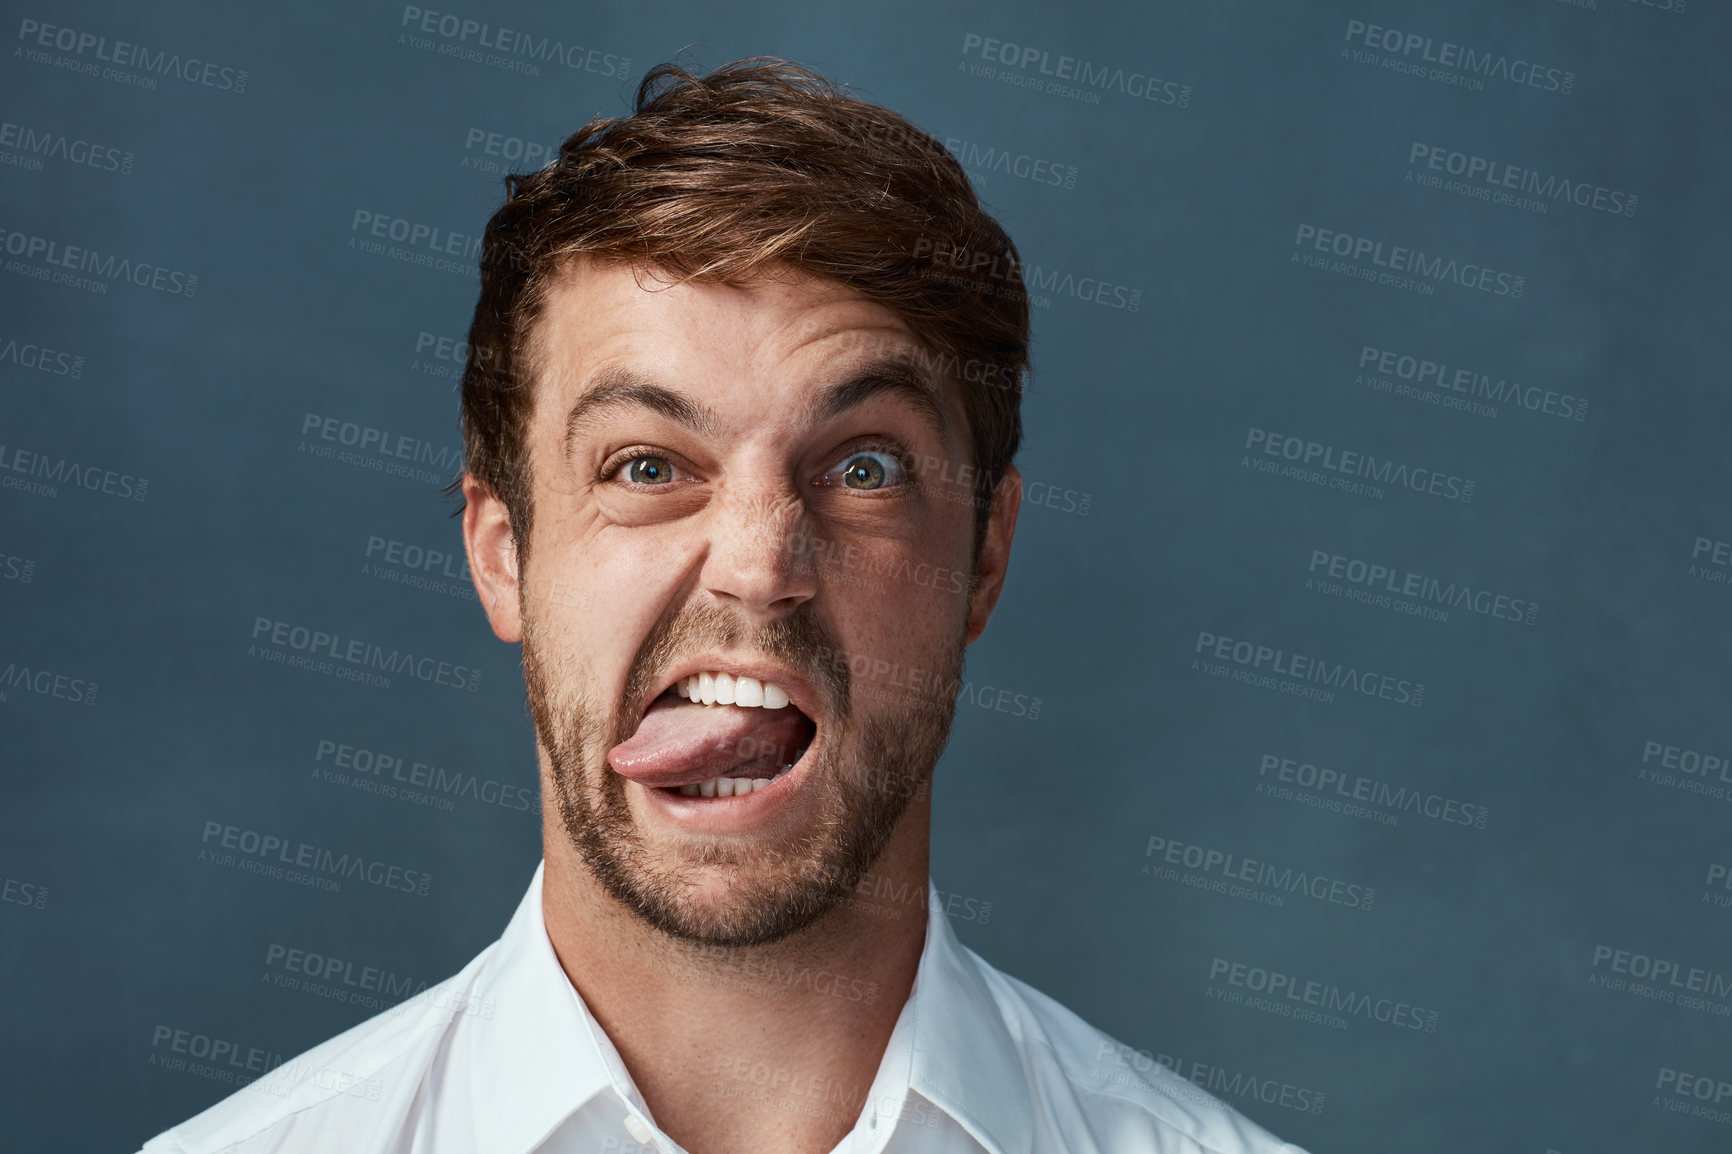 Buy stock photo Studio portrait of a handsome young man sticking his tongue out against a dark background